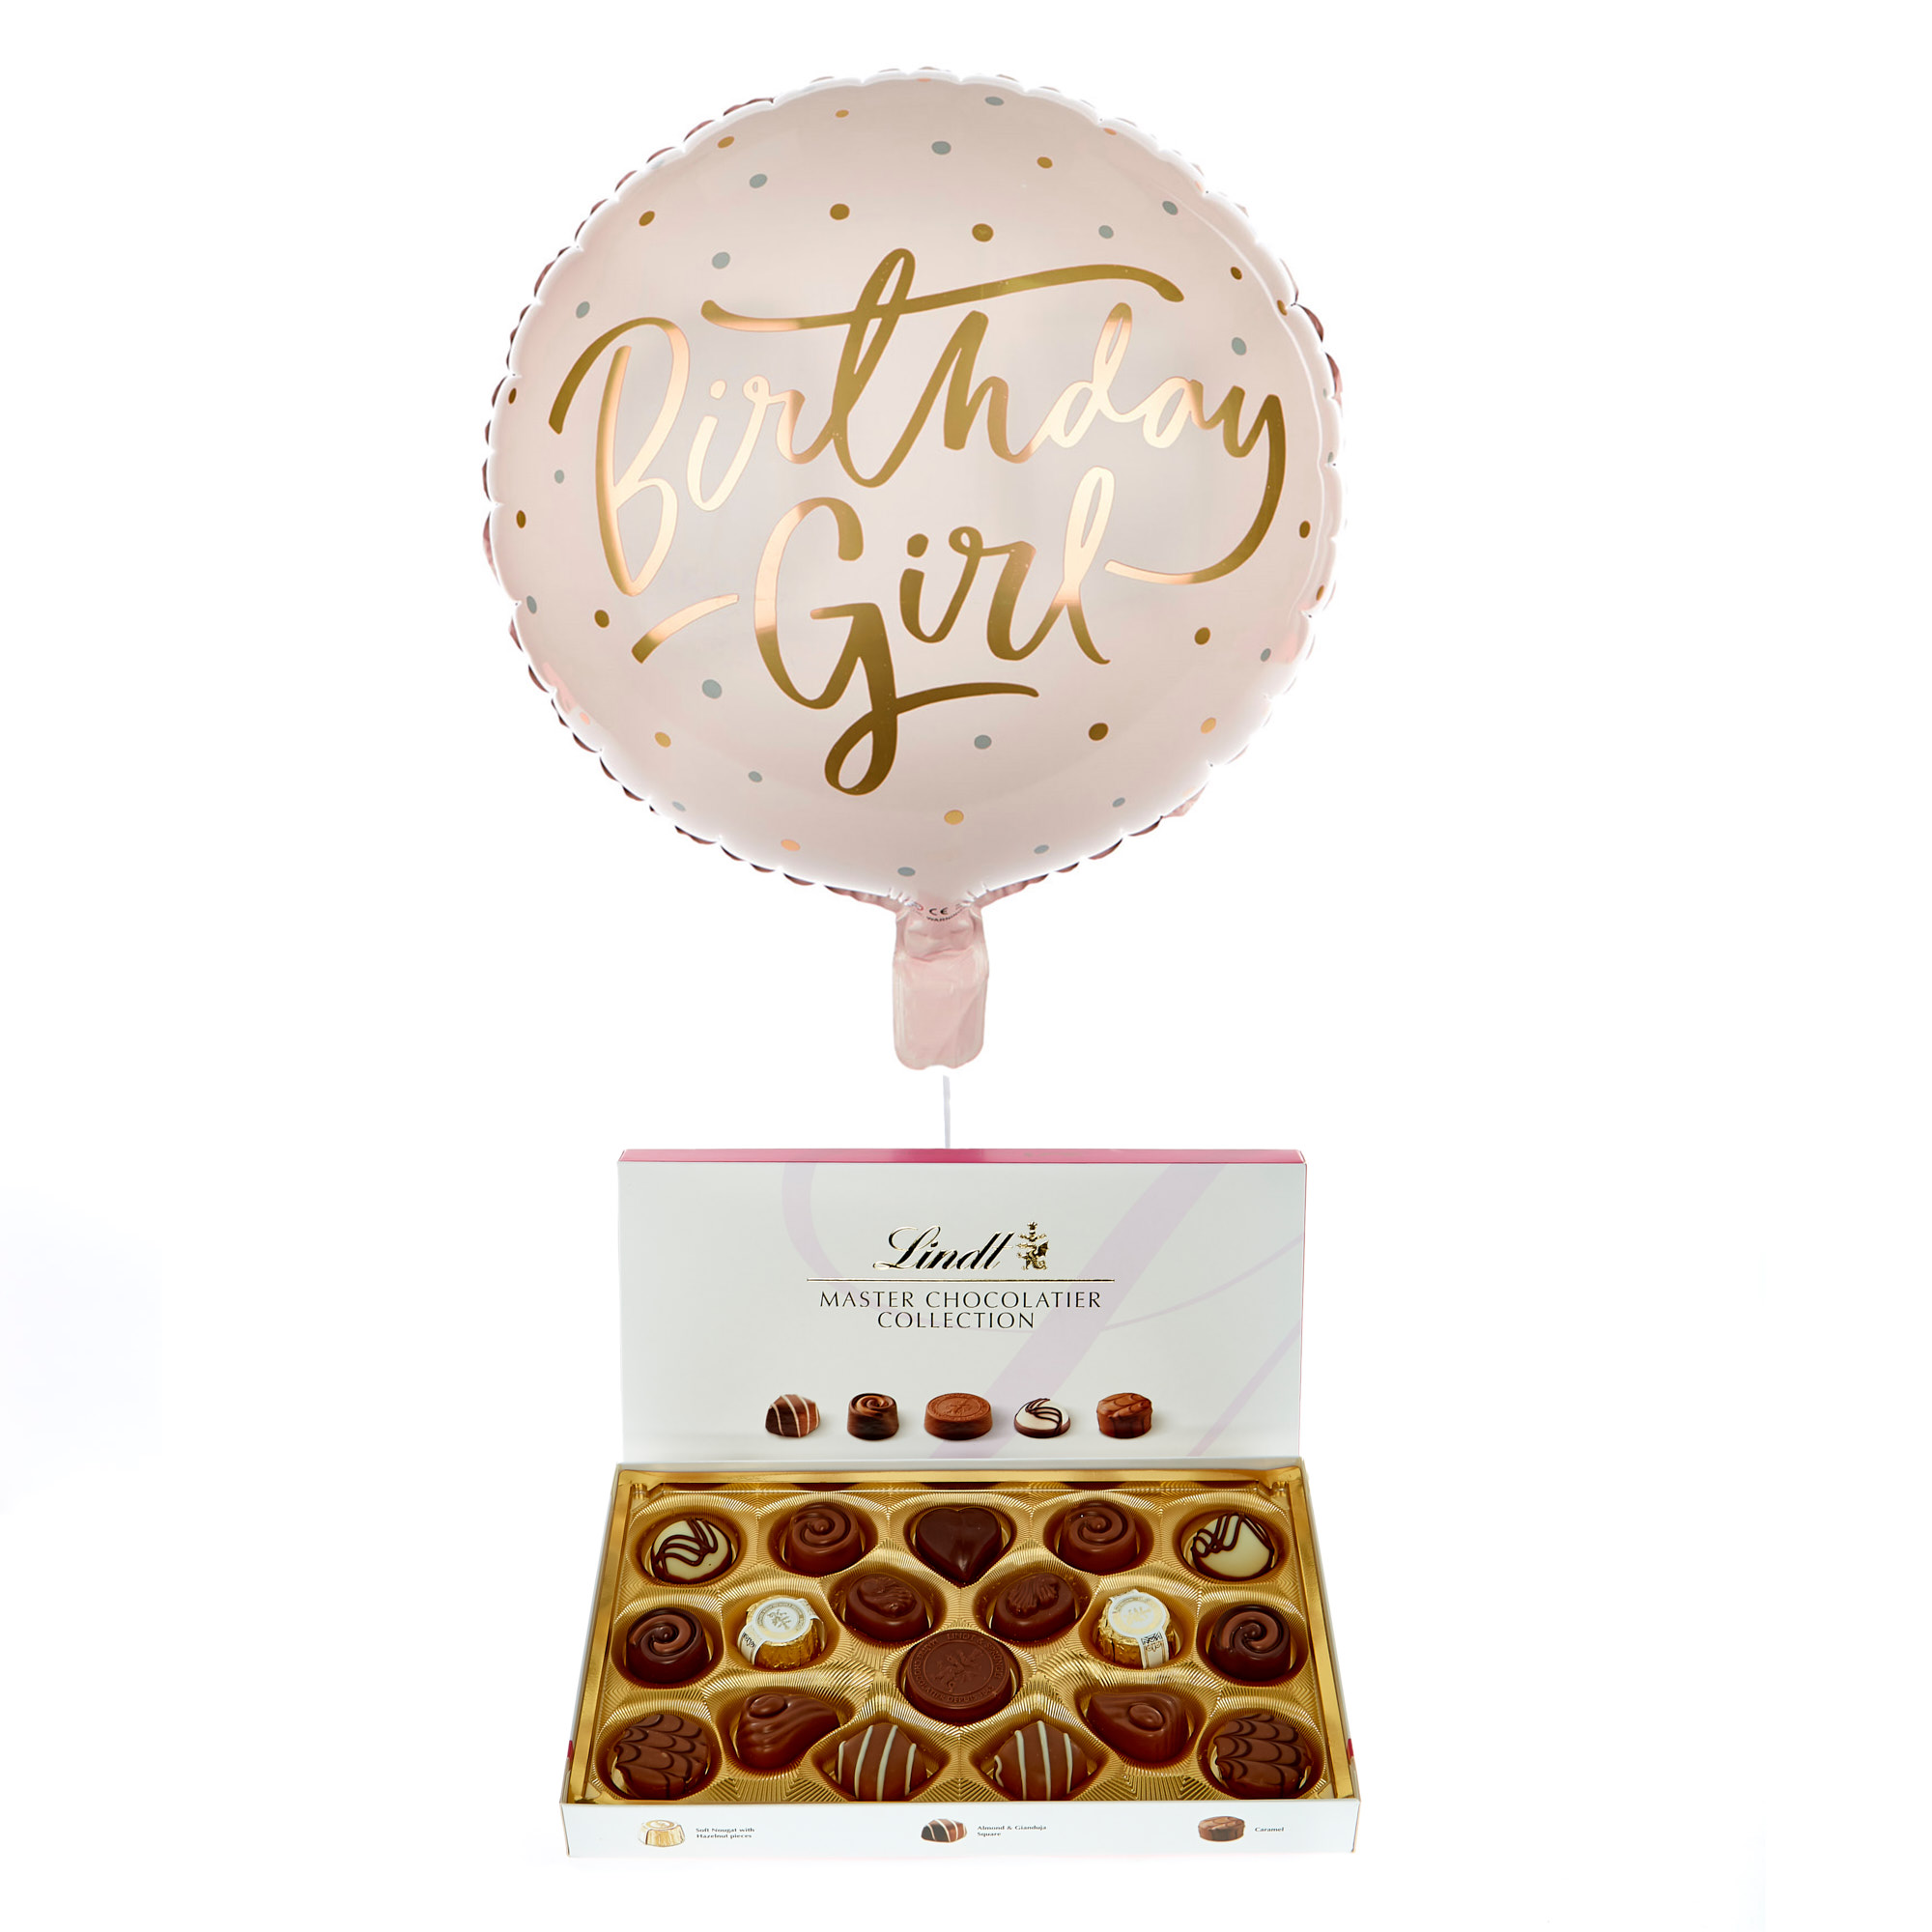 Pink & Gold Birthday Girl Balloon & Lindt Chocolates - FREE GIFT CARD!